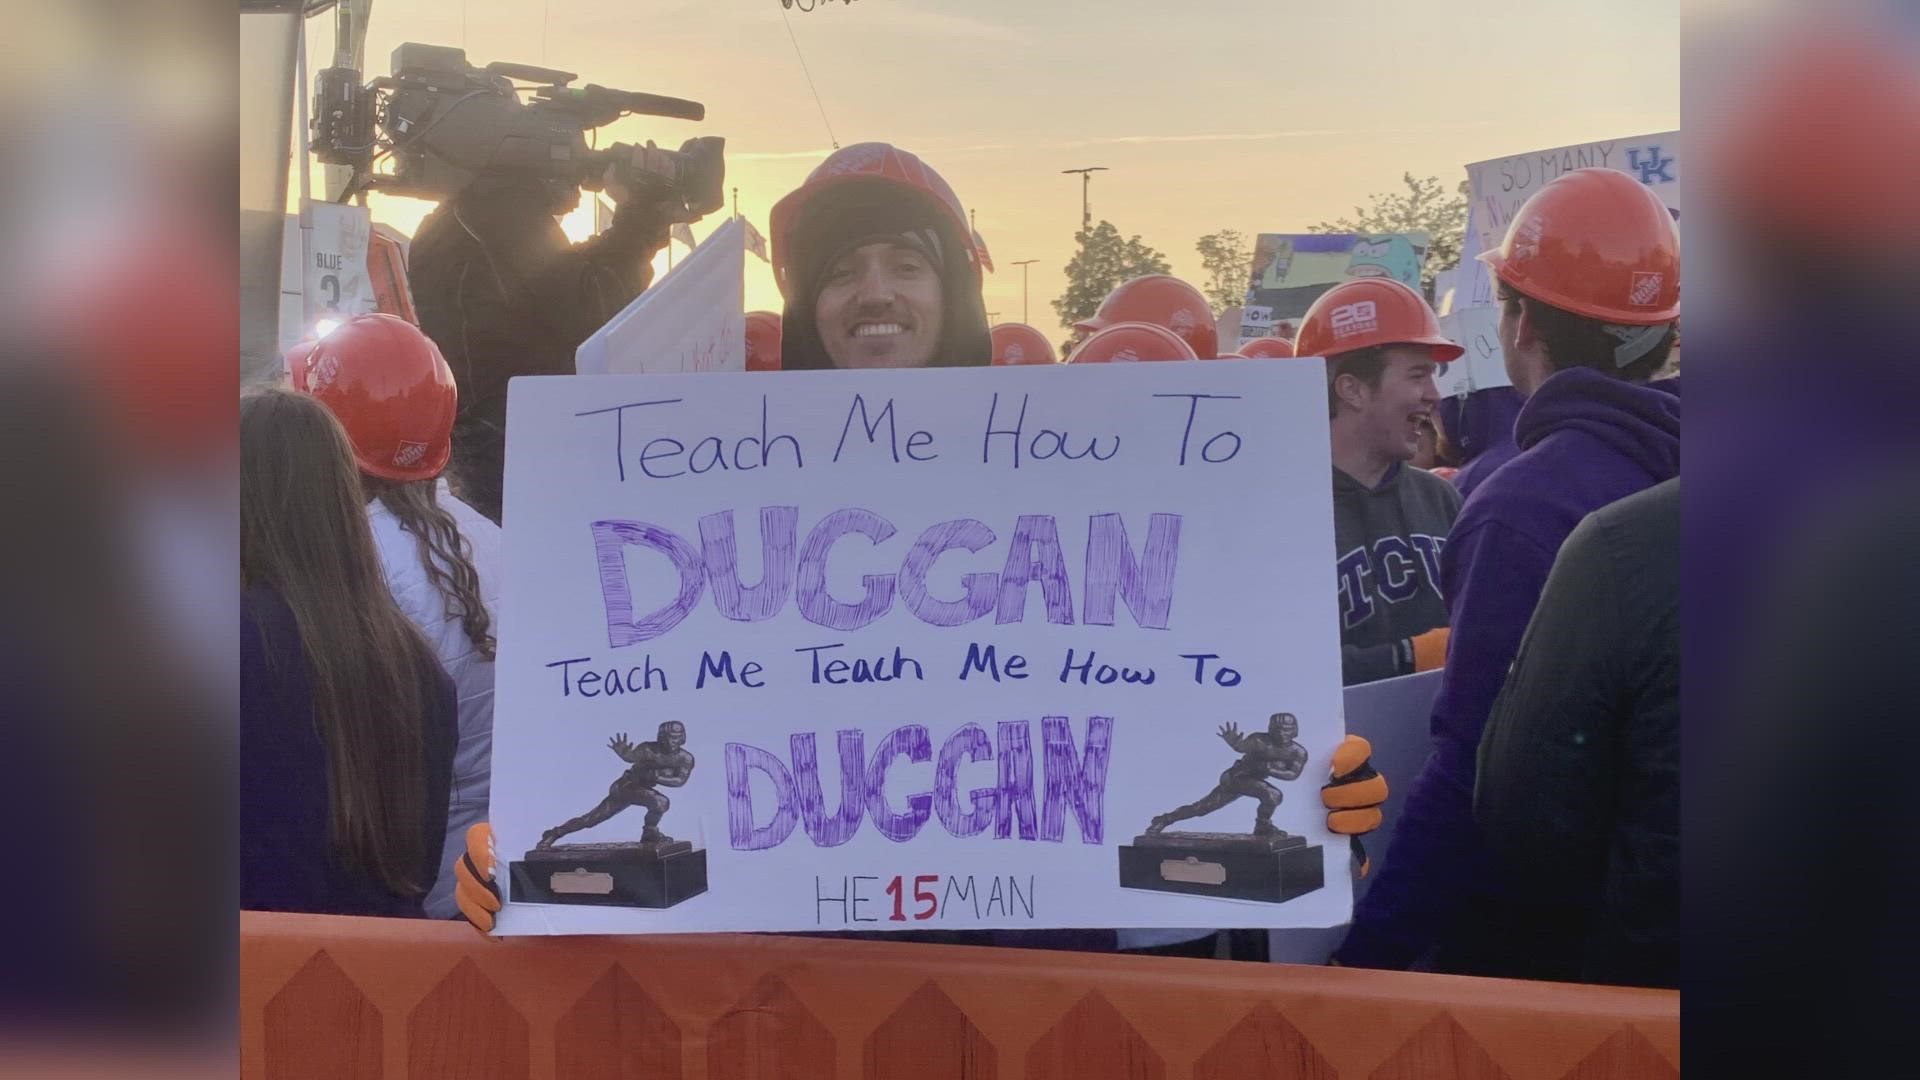 Here are some of the best signs we saw today before the Big 12 Championship!